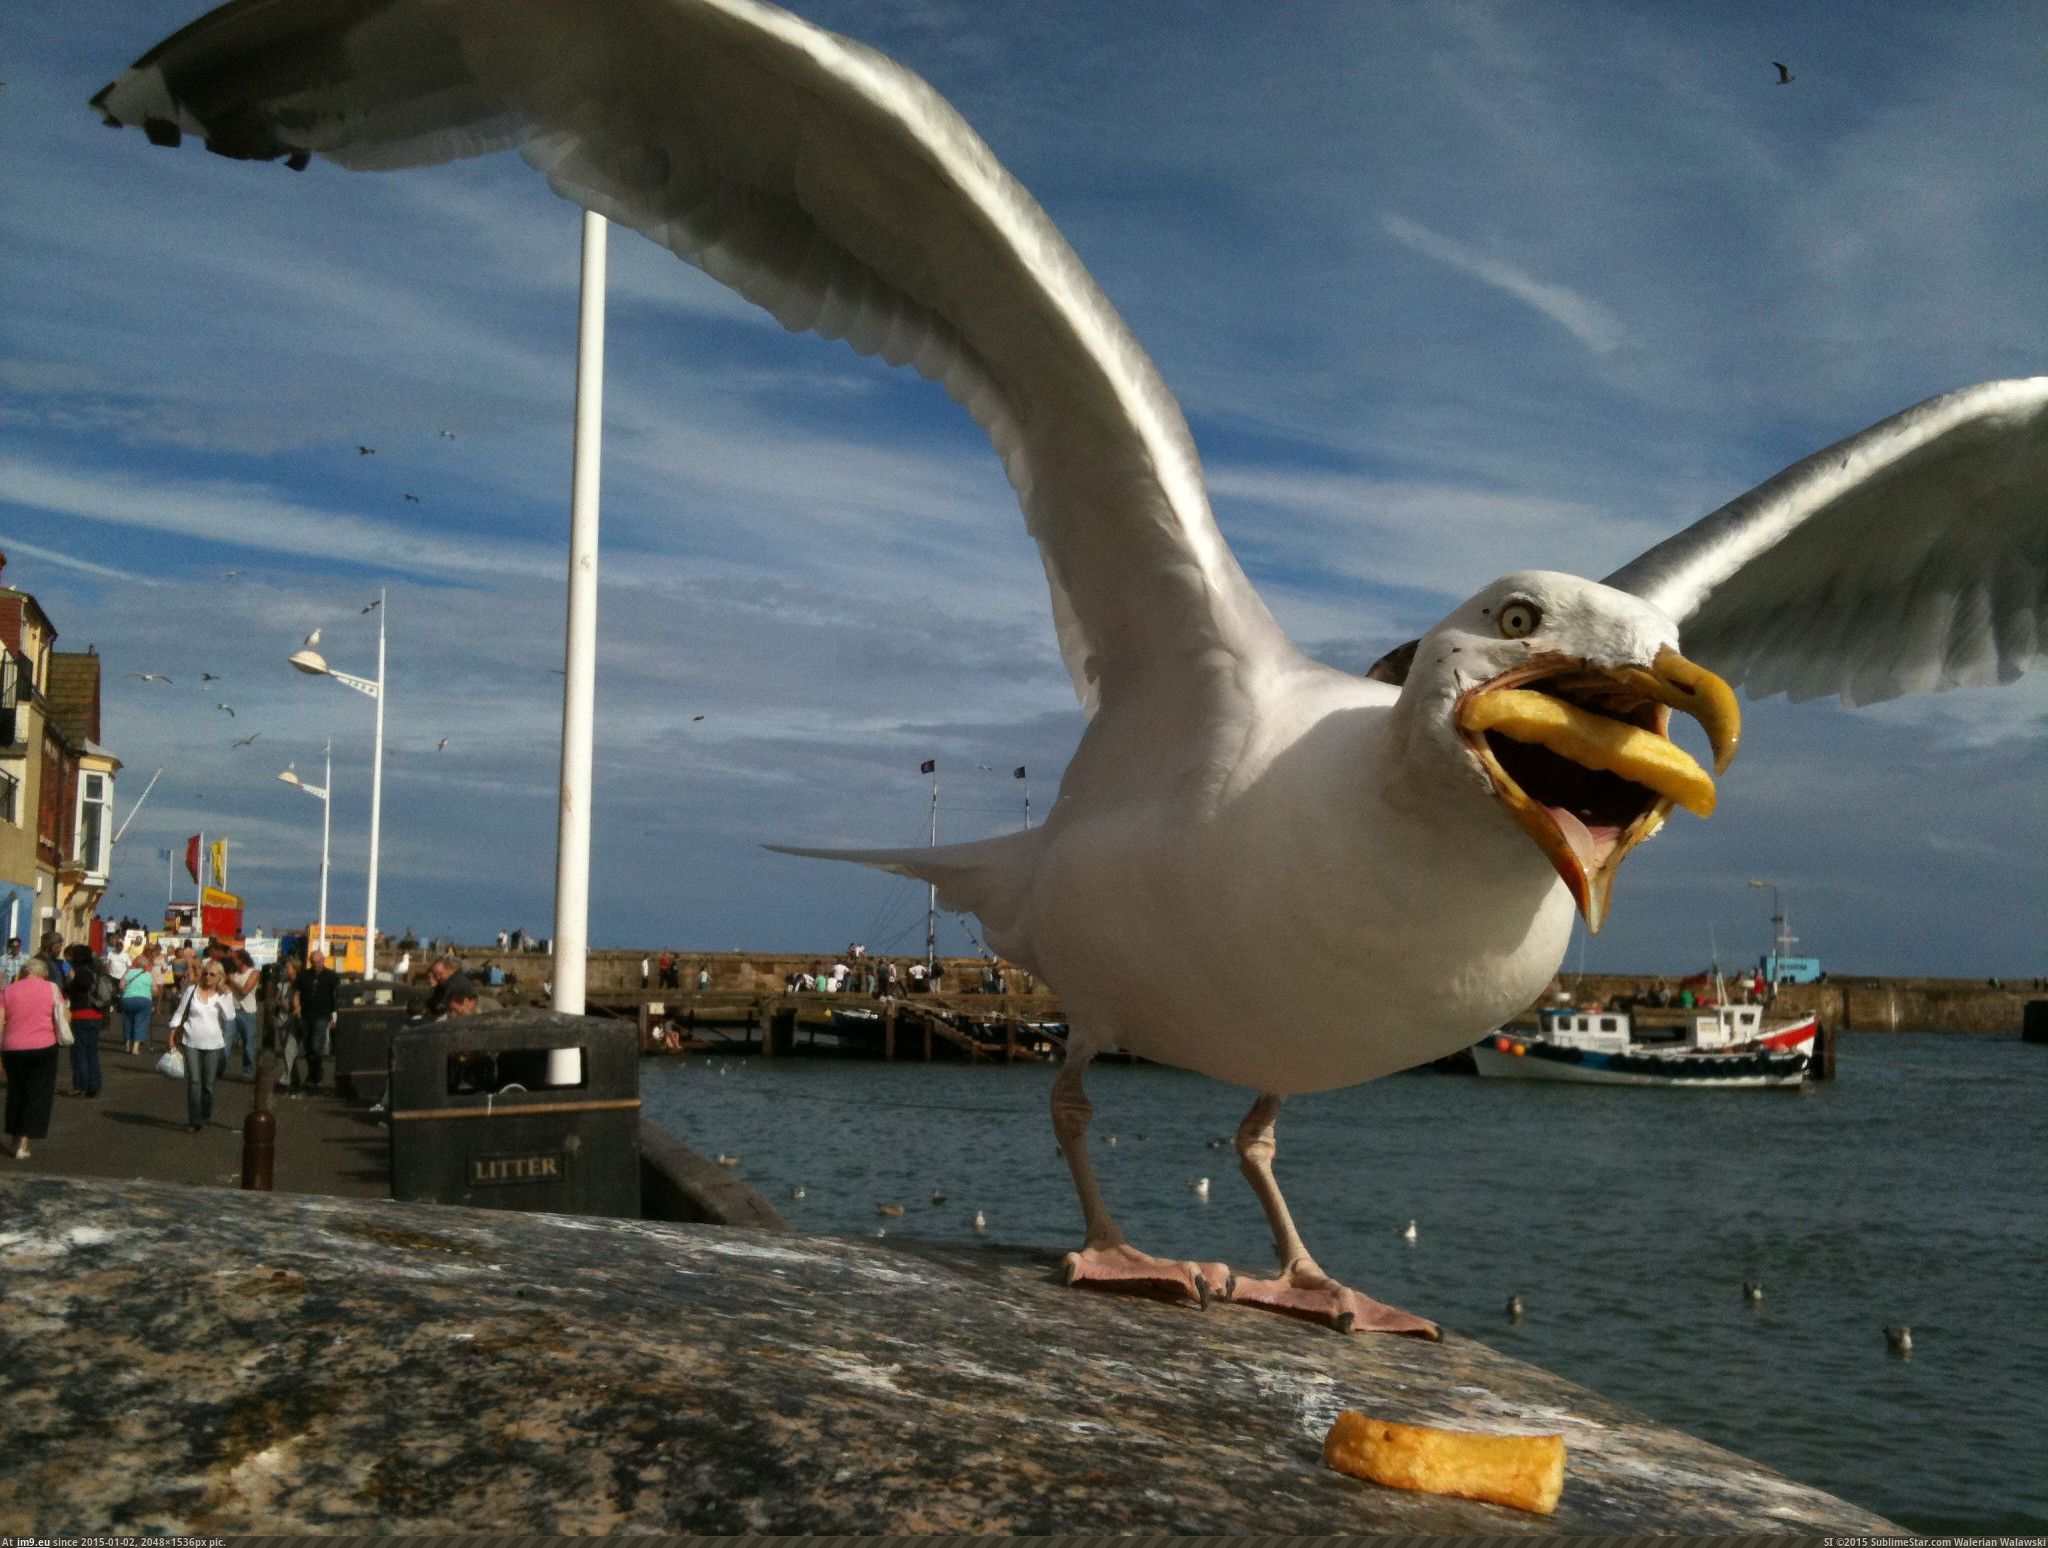 [Funny] Seagull trying to eat a french fry. (in My r/FUNNY favs)